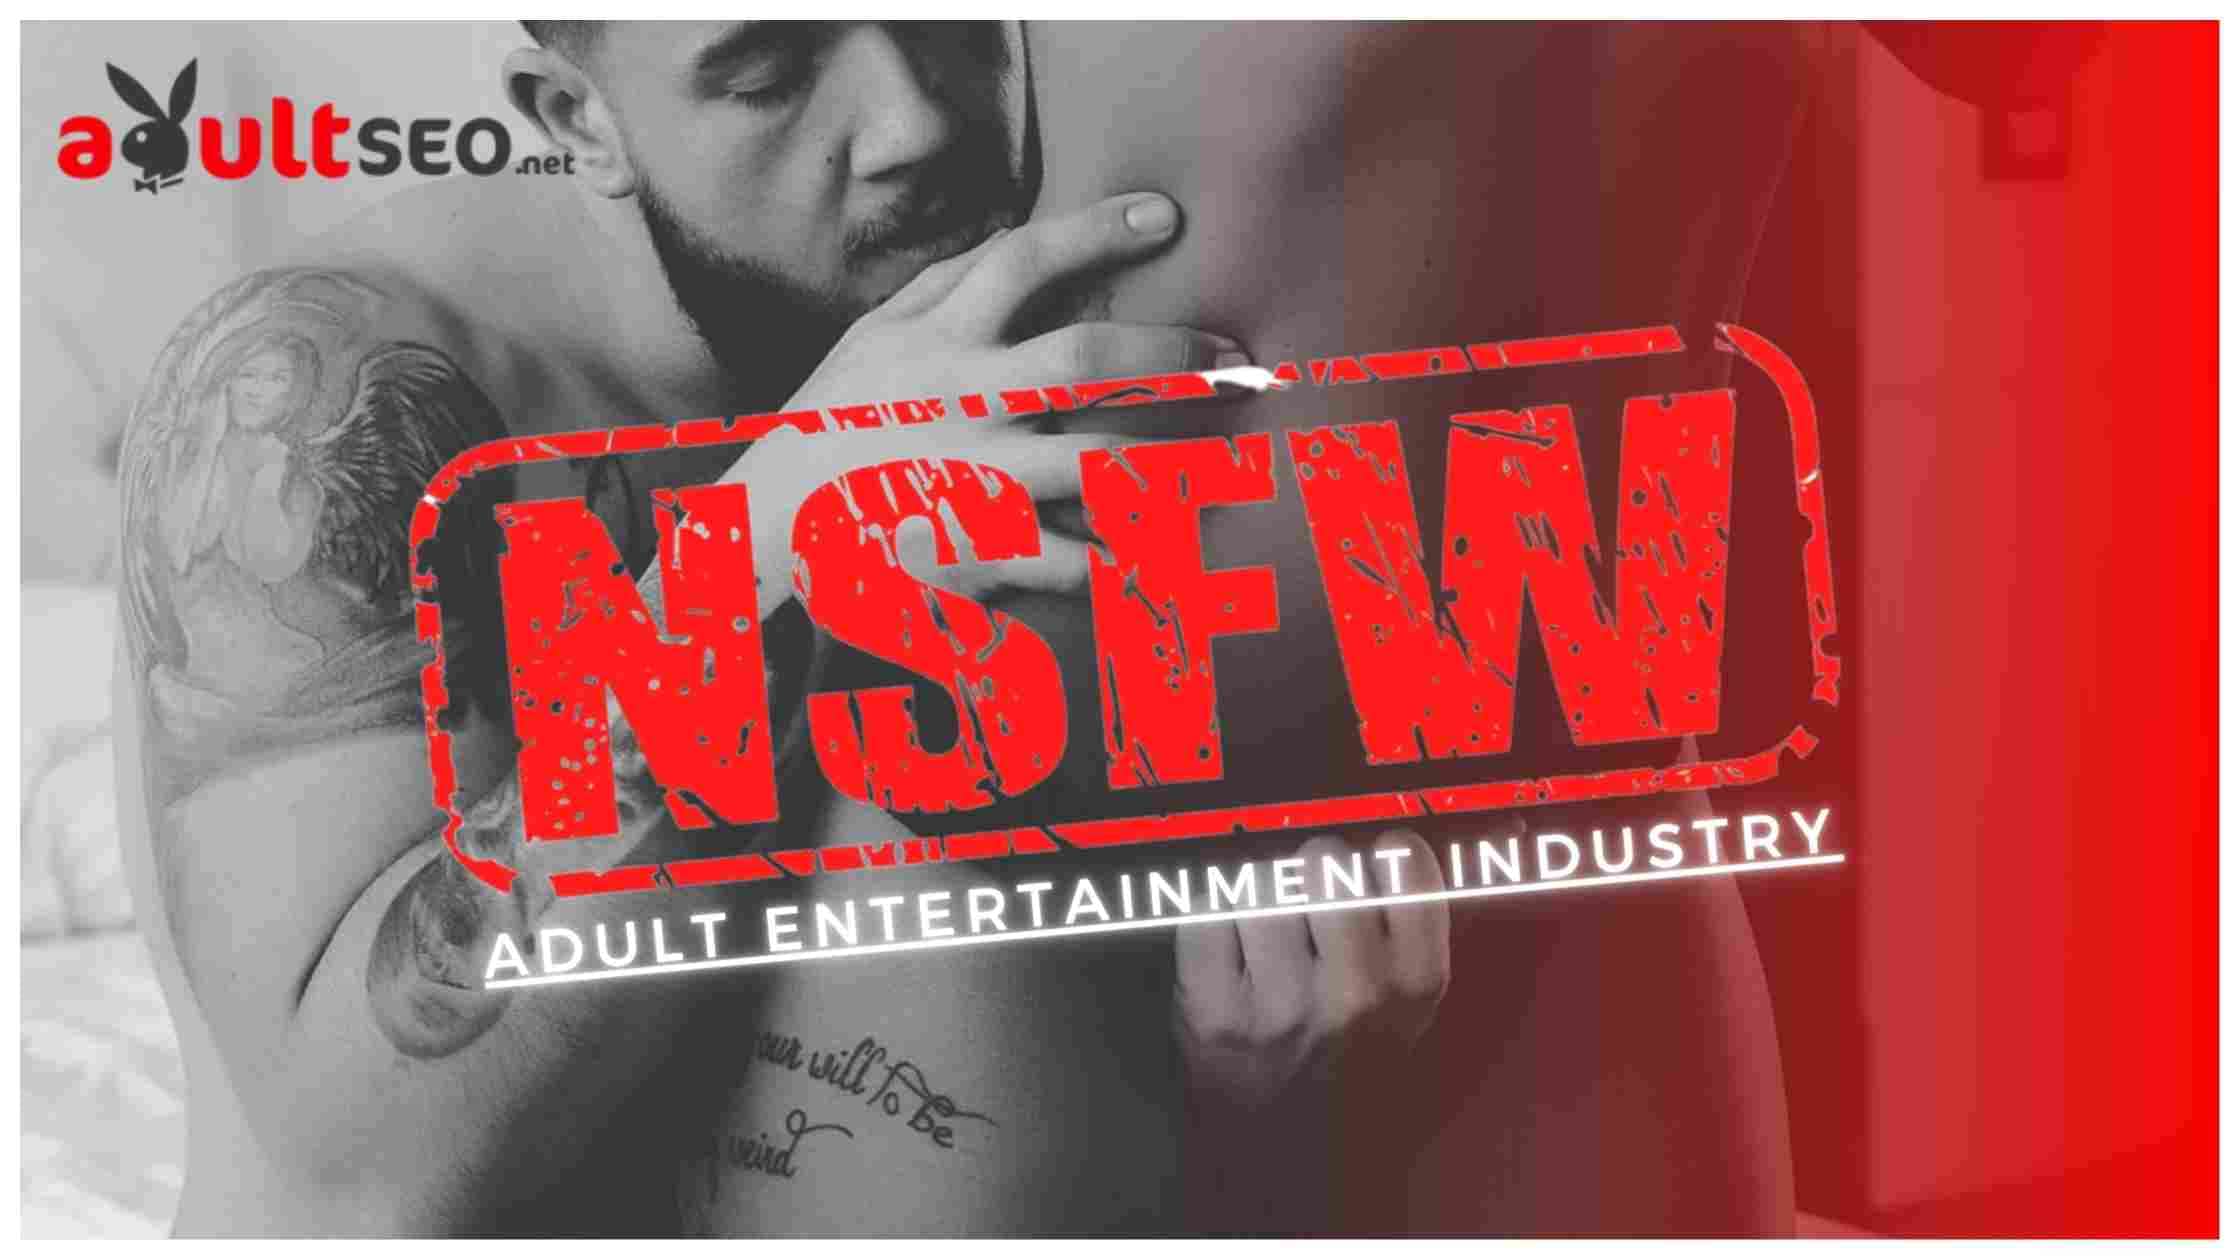 NSFW and its connection with the adult entertainment industry